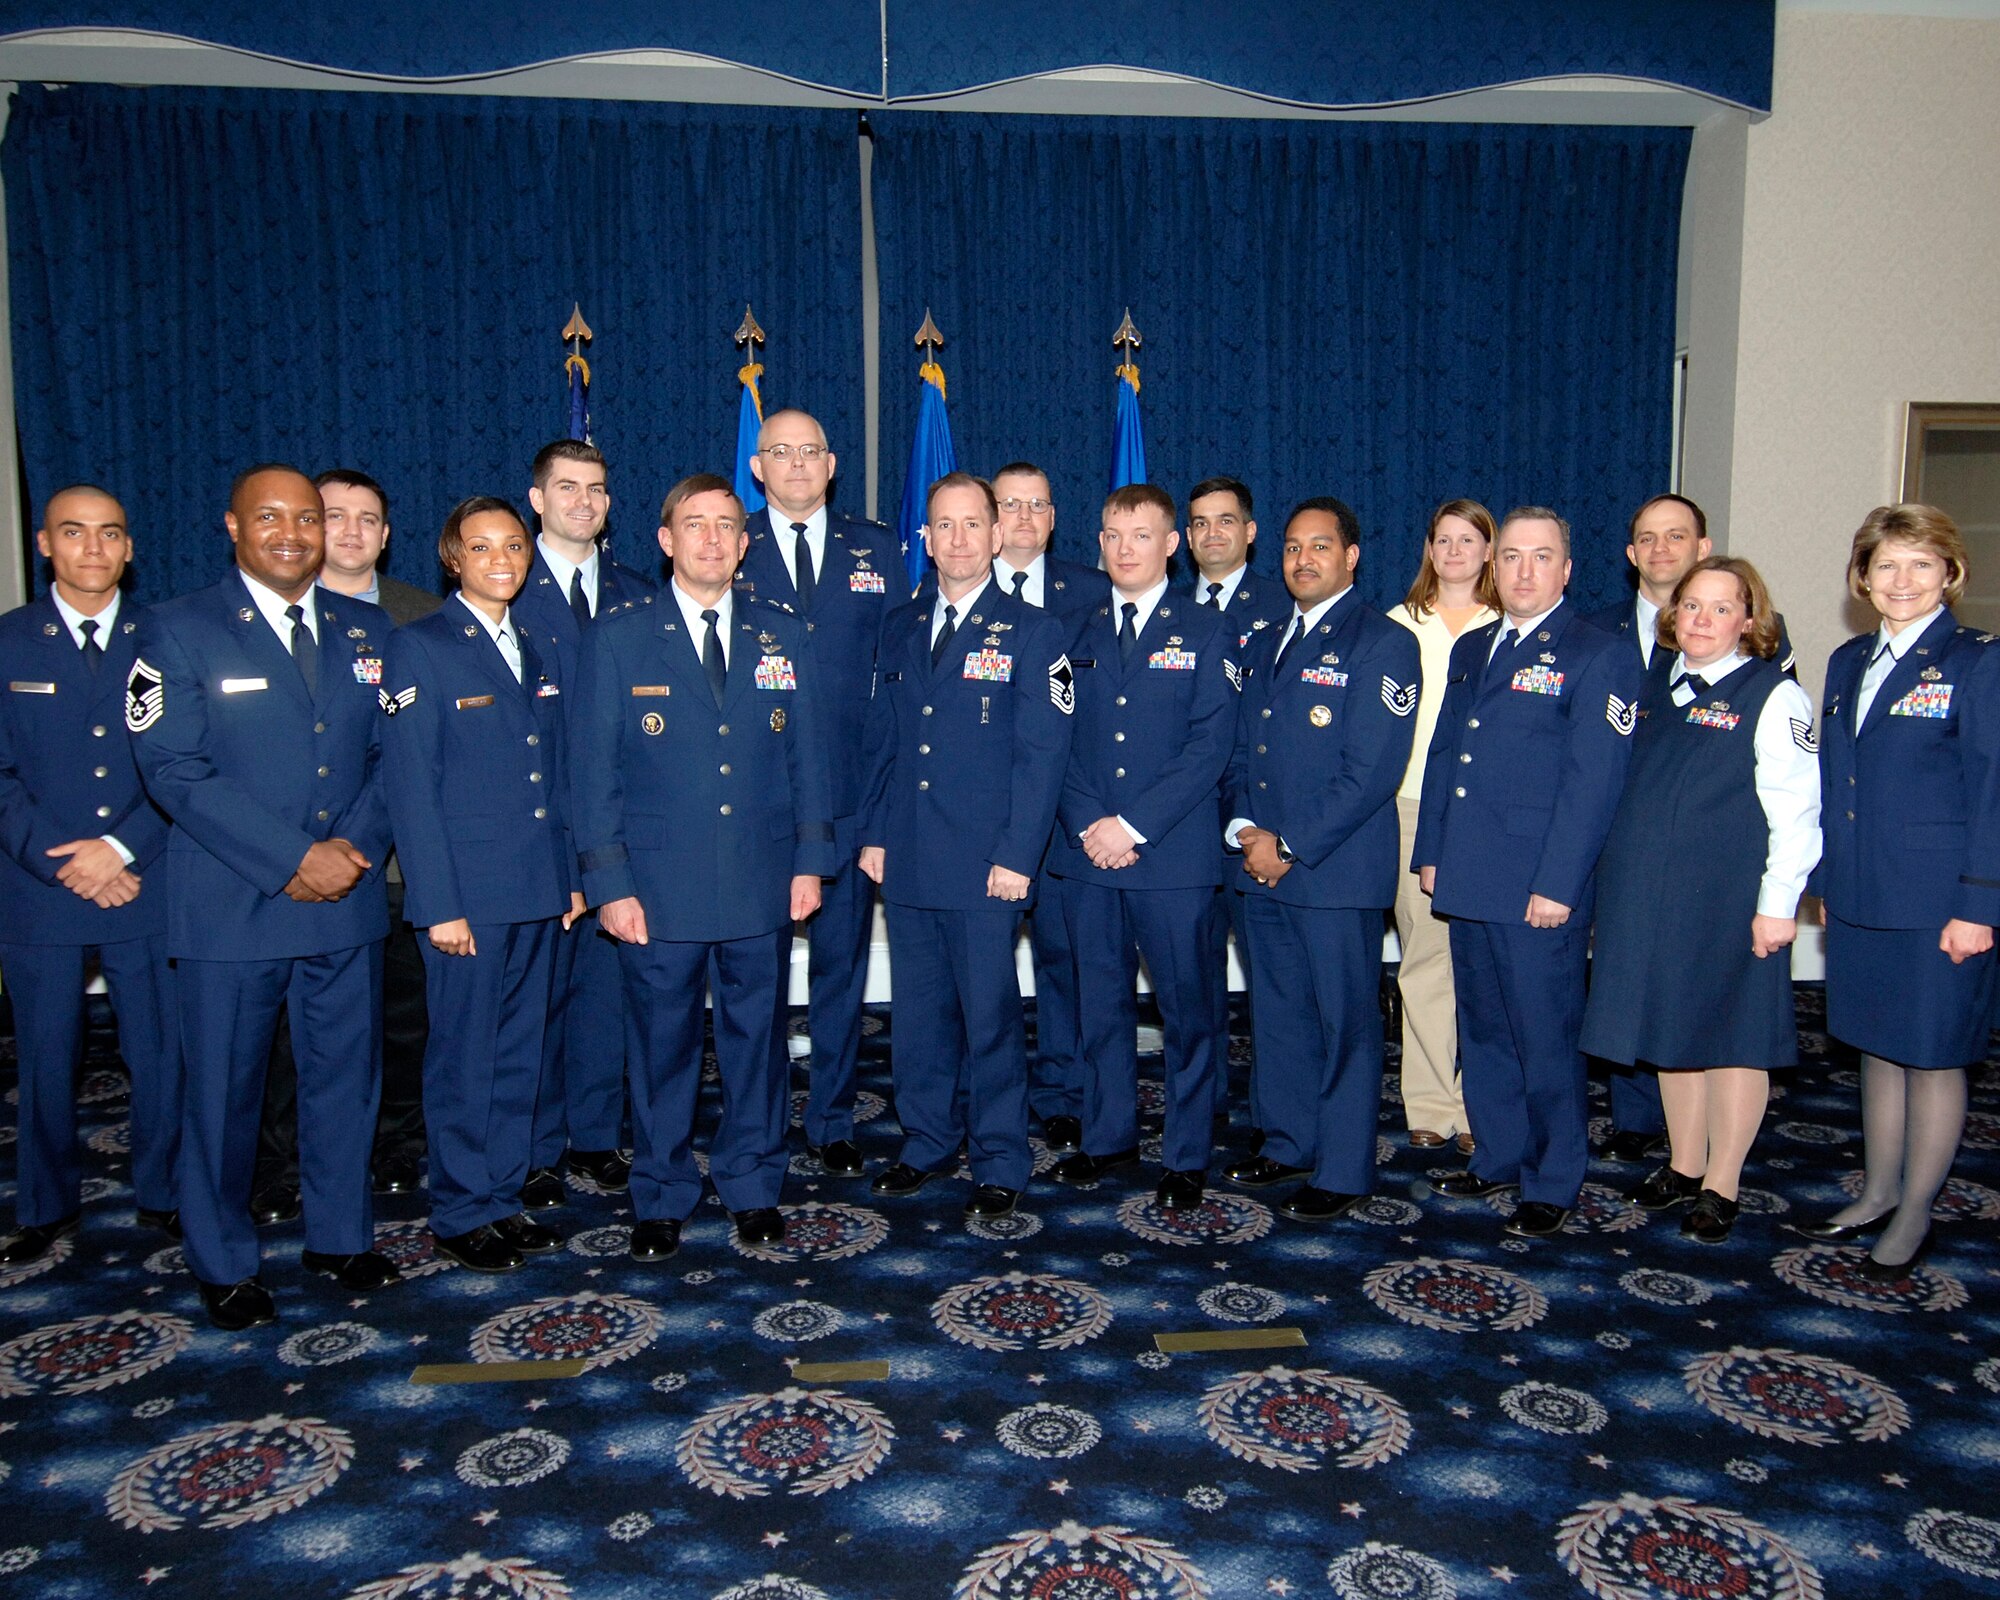 Major General Robert L. Smolen, AFDW commander (third from left) and Colonel Kim M. Johnson, 844th communications group commander (first from right) pose with the 2006 AFDW Communications and Information annual award winners.  (U. S. Air Force photo/Dennis Thomas, 844CG)
